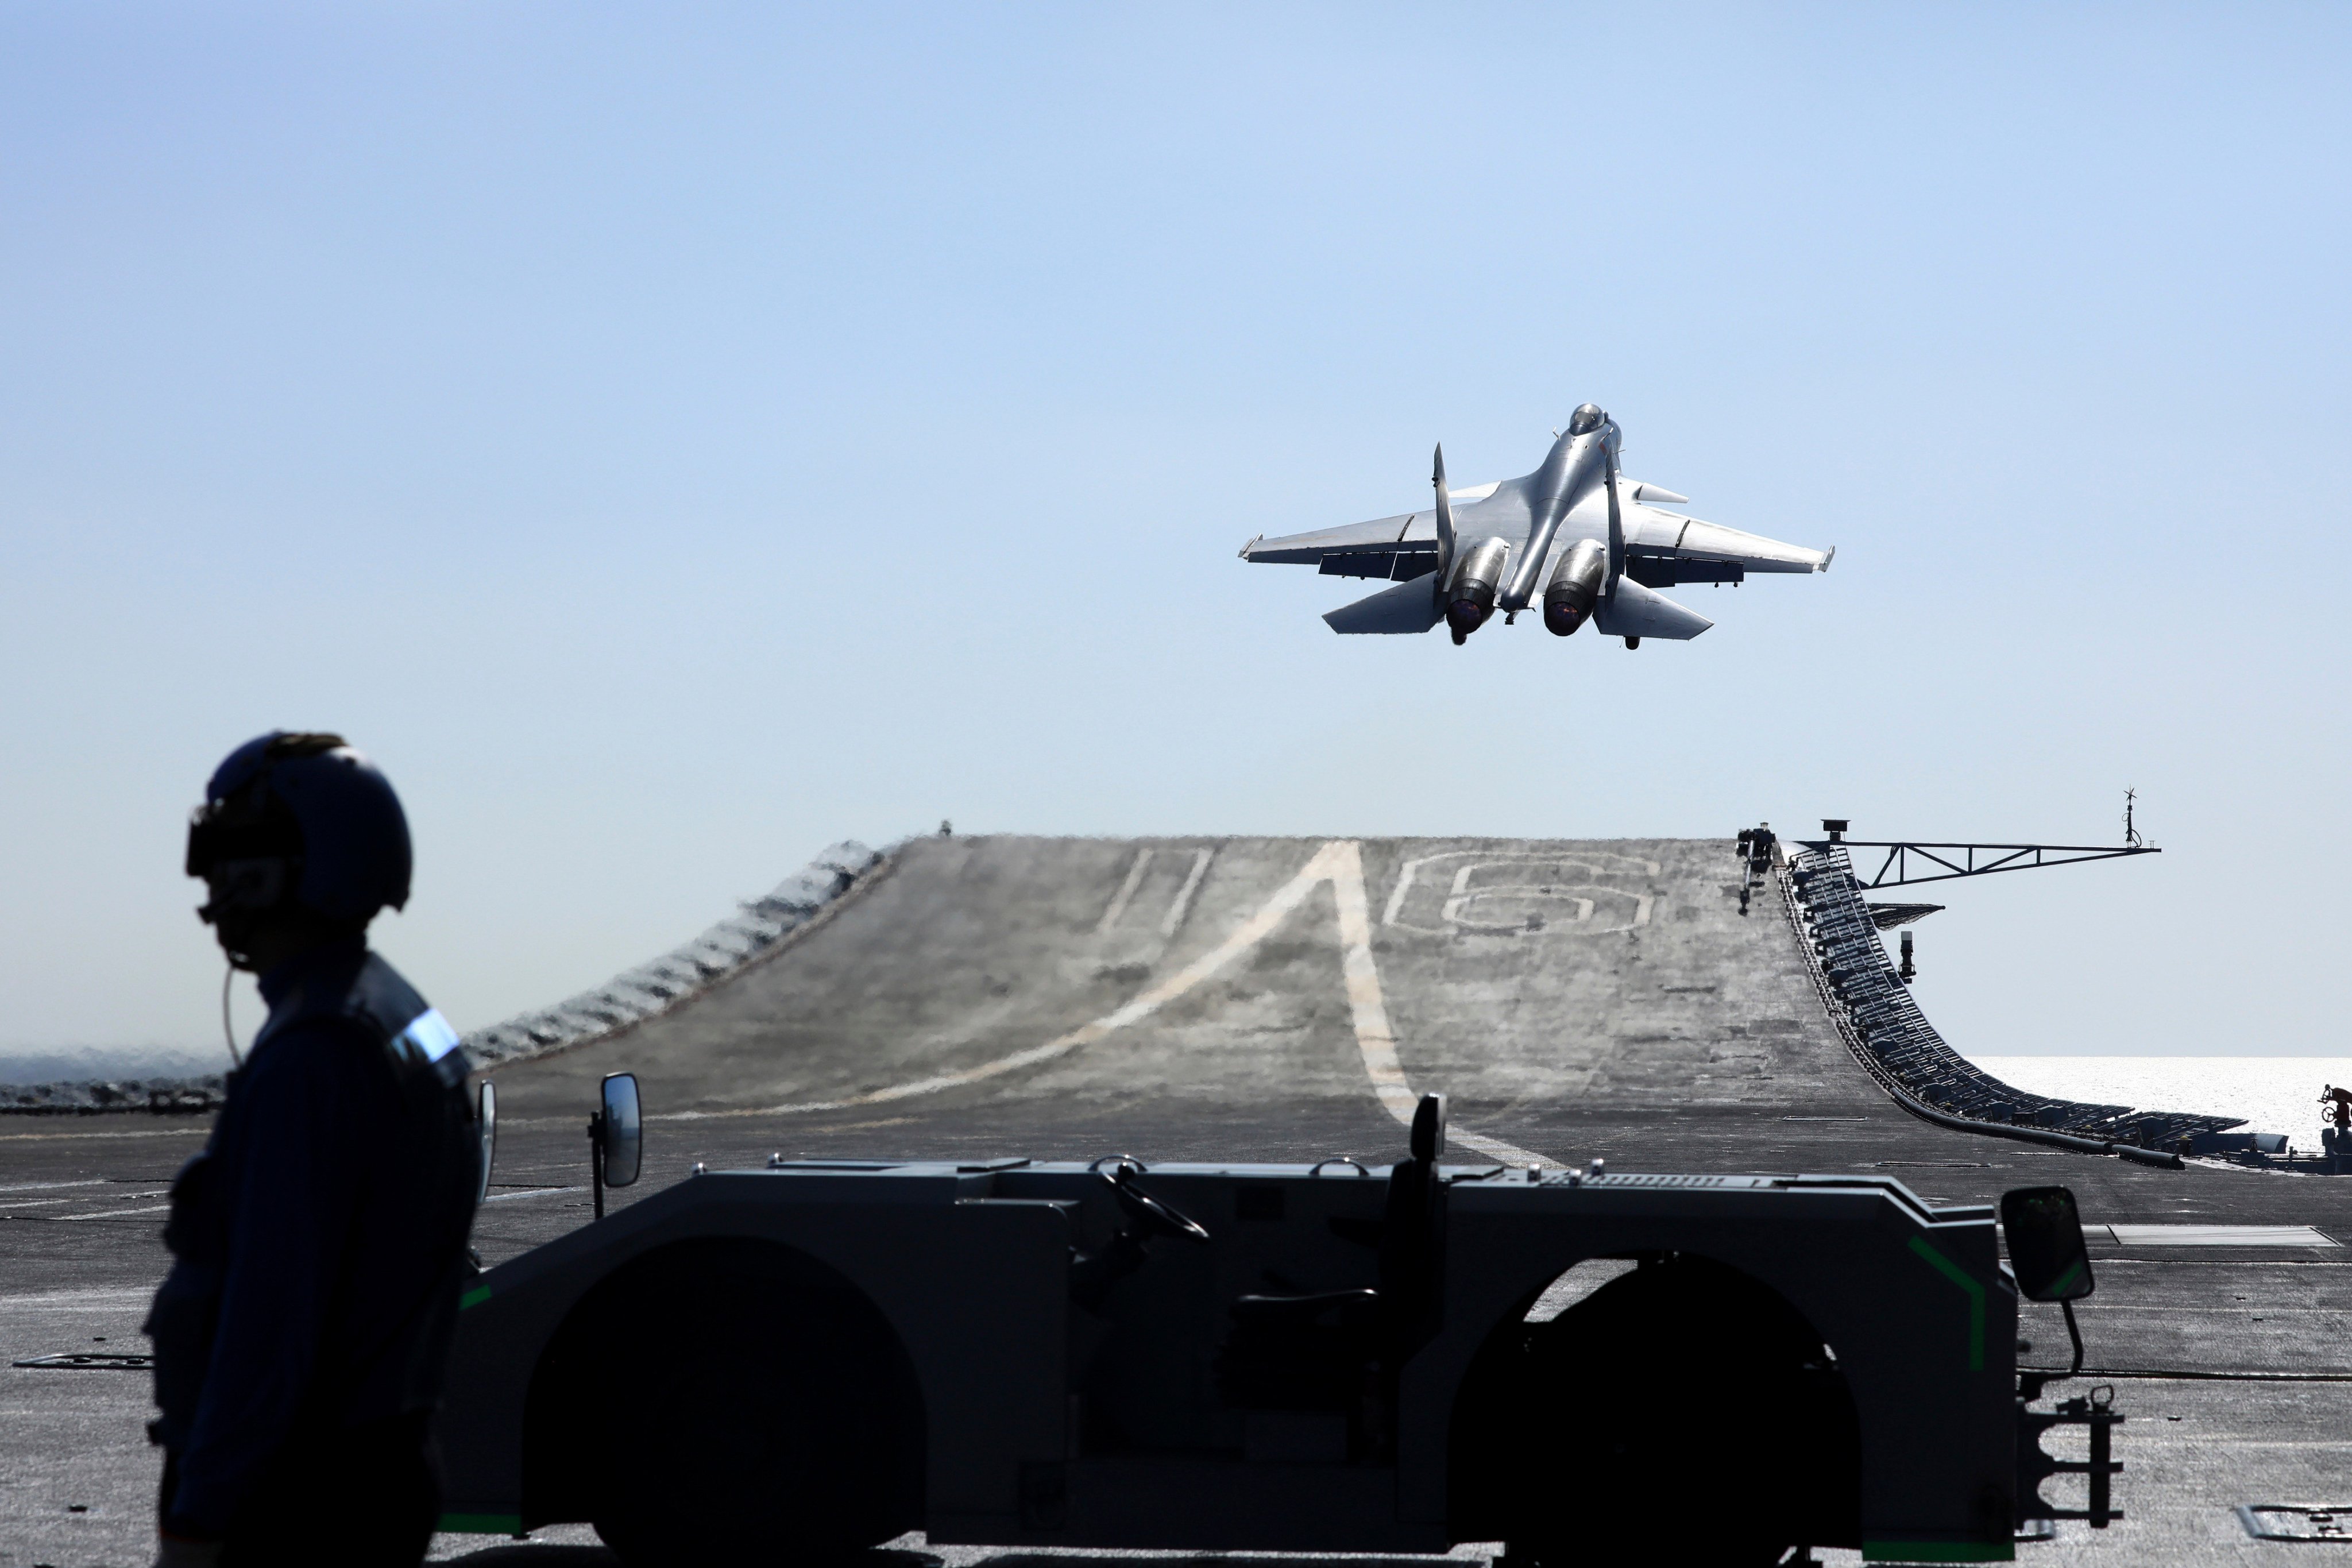 Chinese scientists and engineers have created a prototype of a new electromagnetic catapult for aircraft carriers that outstrips anything seen before. Photo: Xinhua via AP